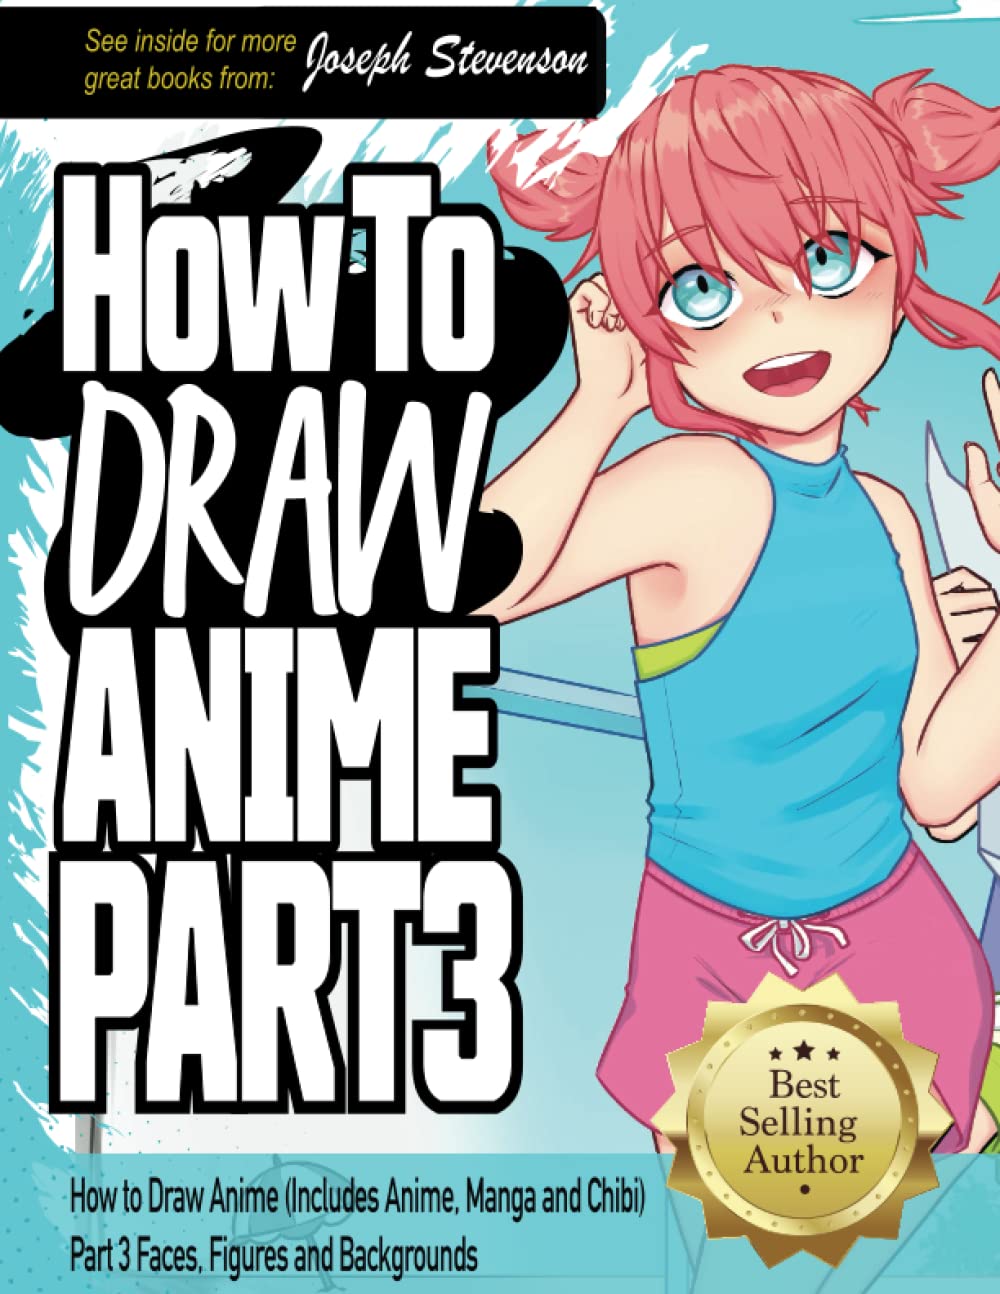 How to Draw Anime (Includes Anime, Manga and Chibi) Part 3 Faces, Figures and Backgrounds